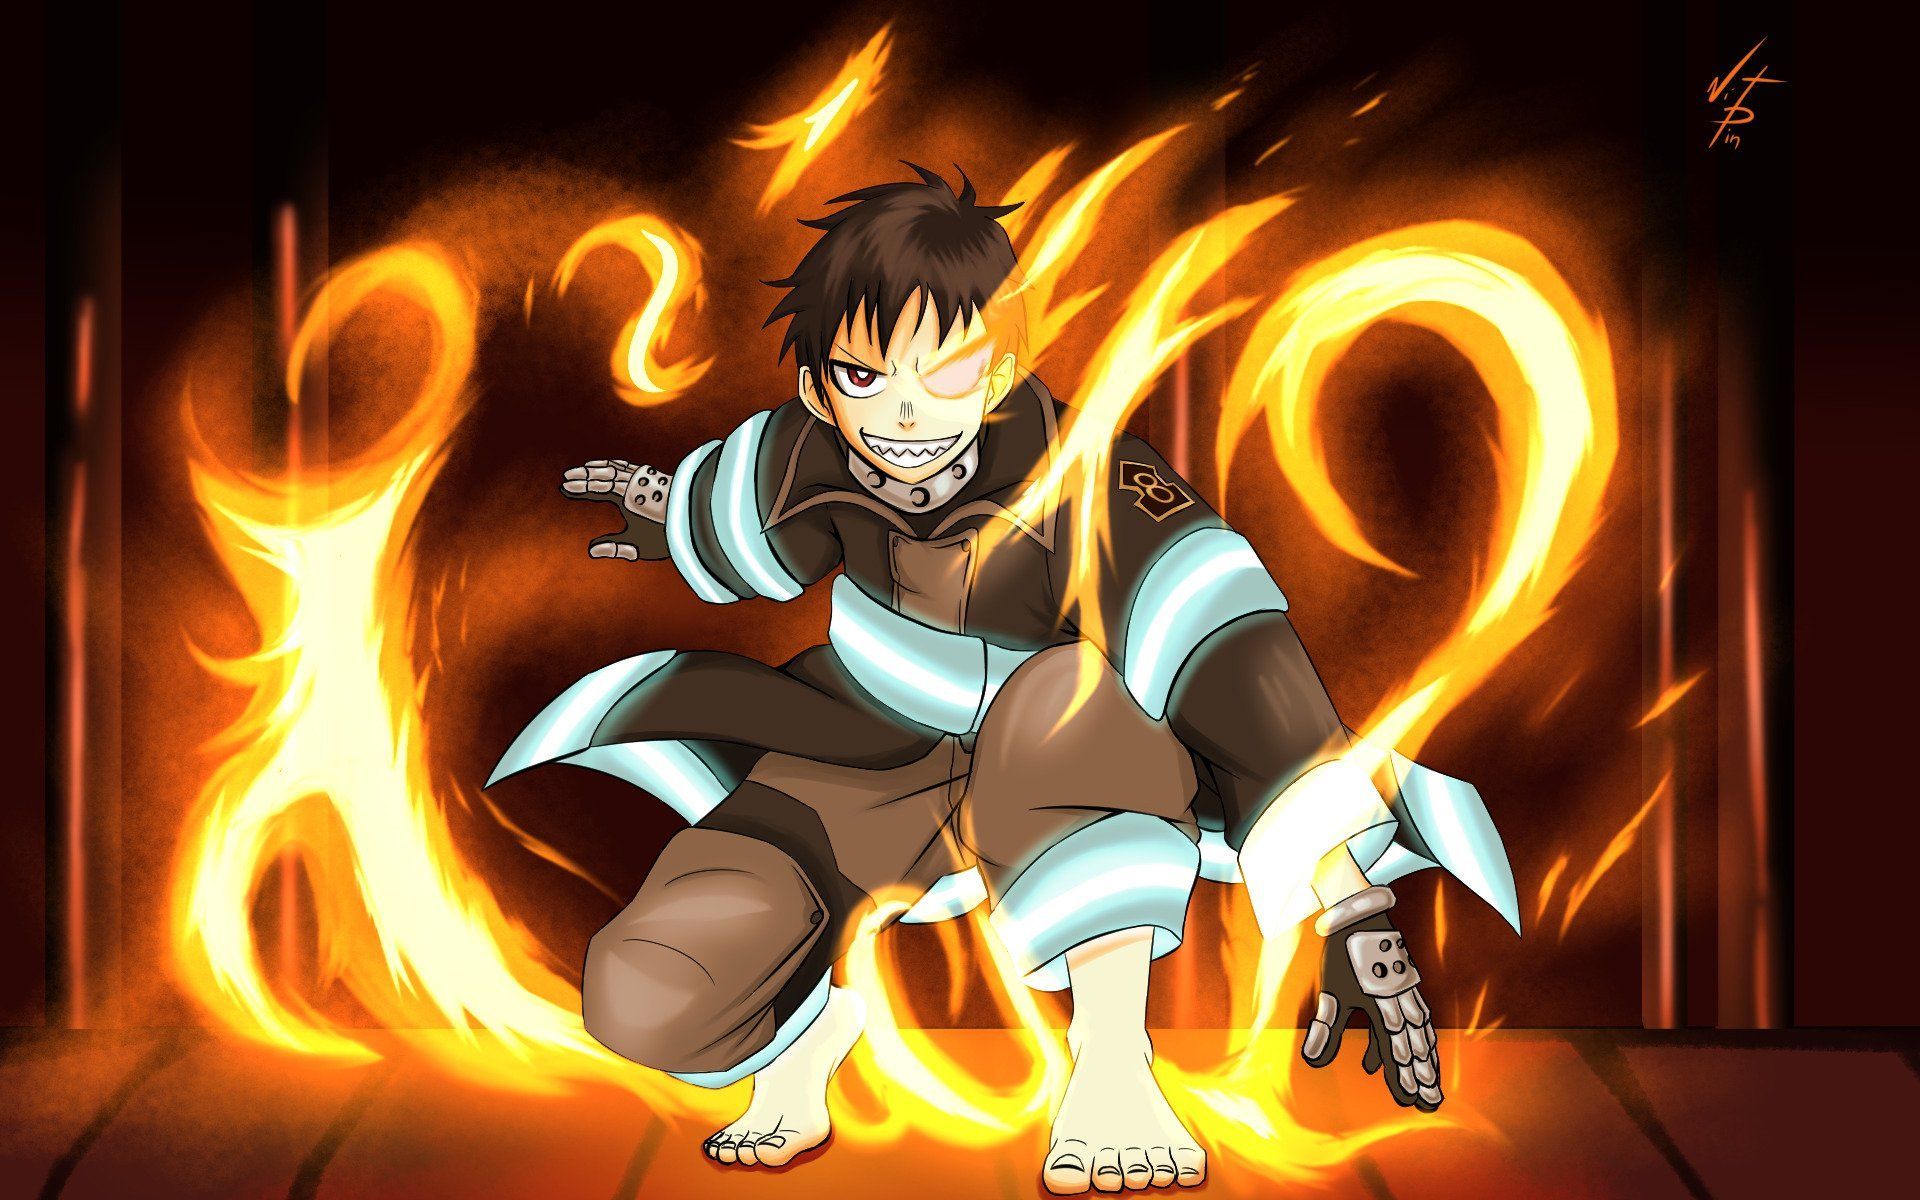 Fire Force Anime Shinra Wallpaper. Anime, Tokyo ghoul picture